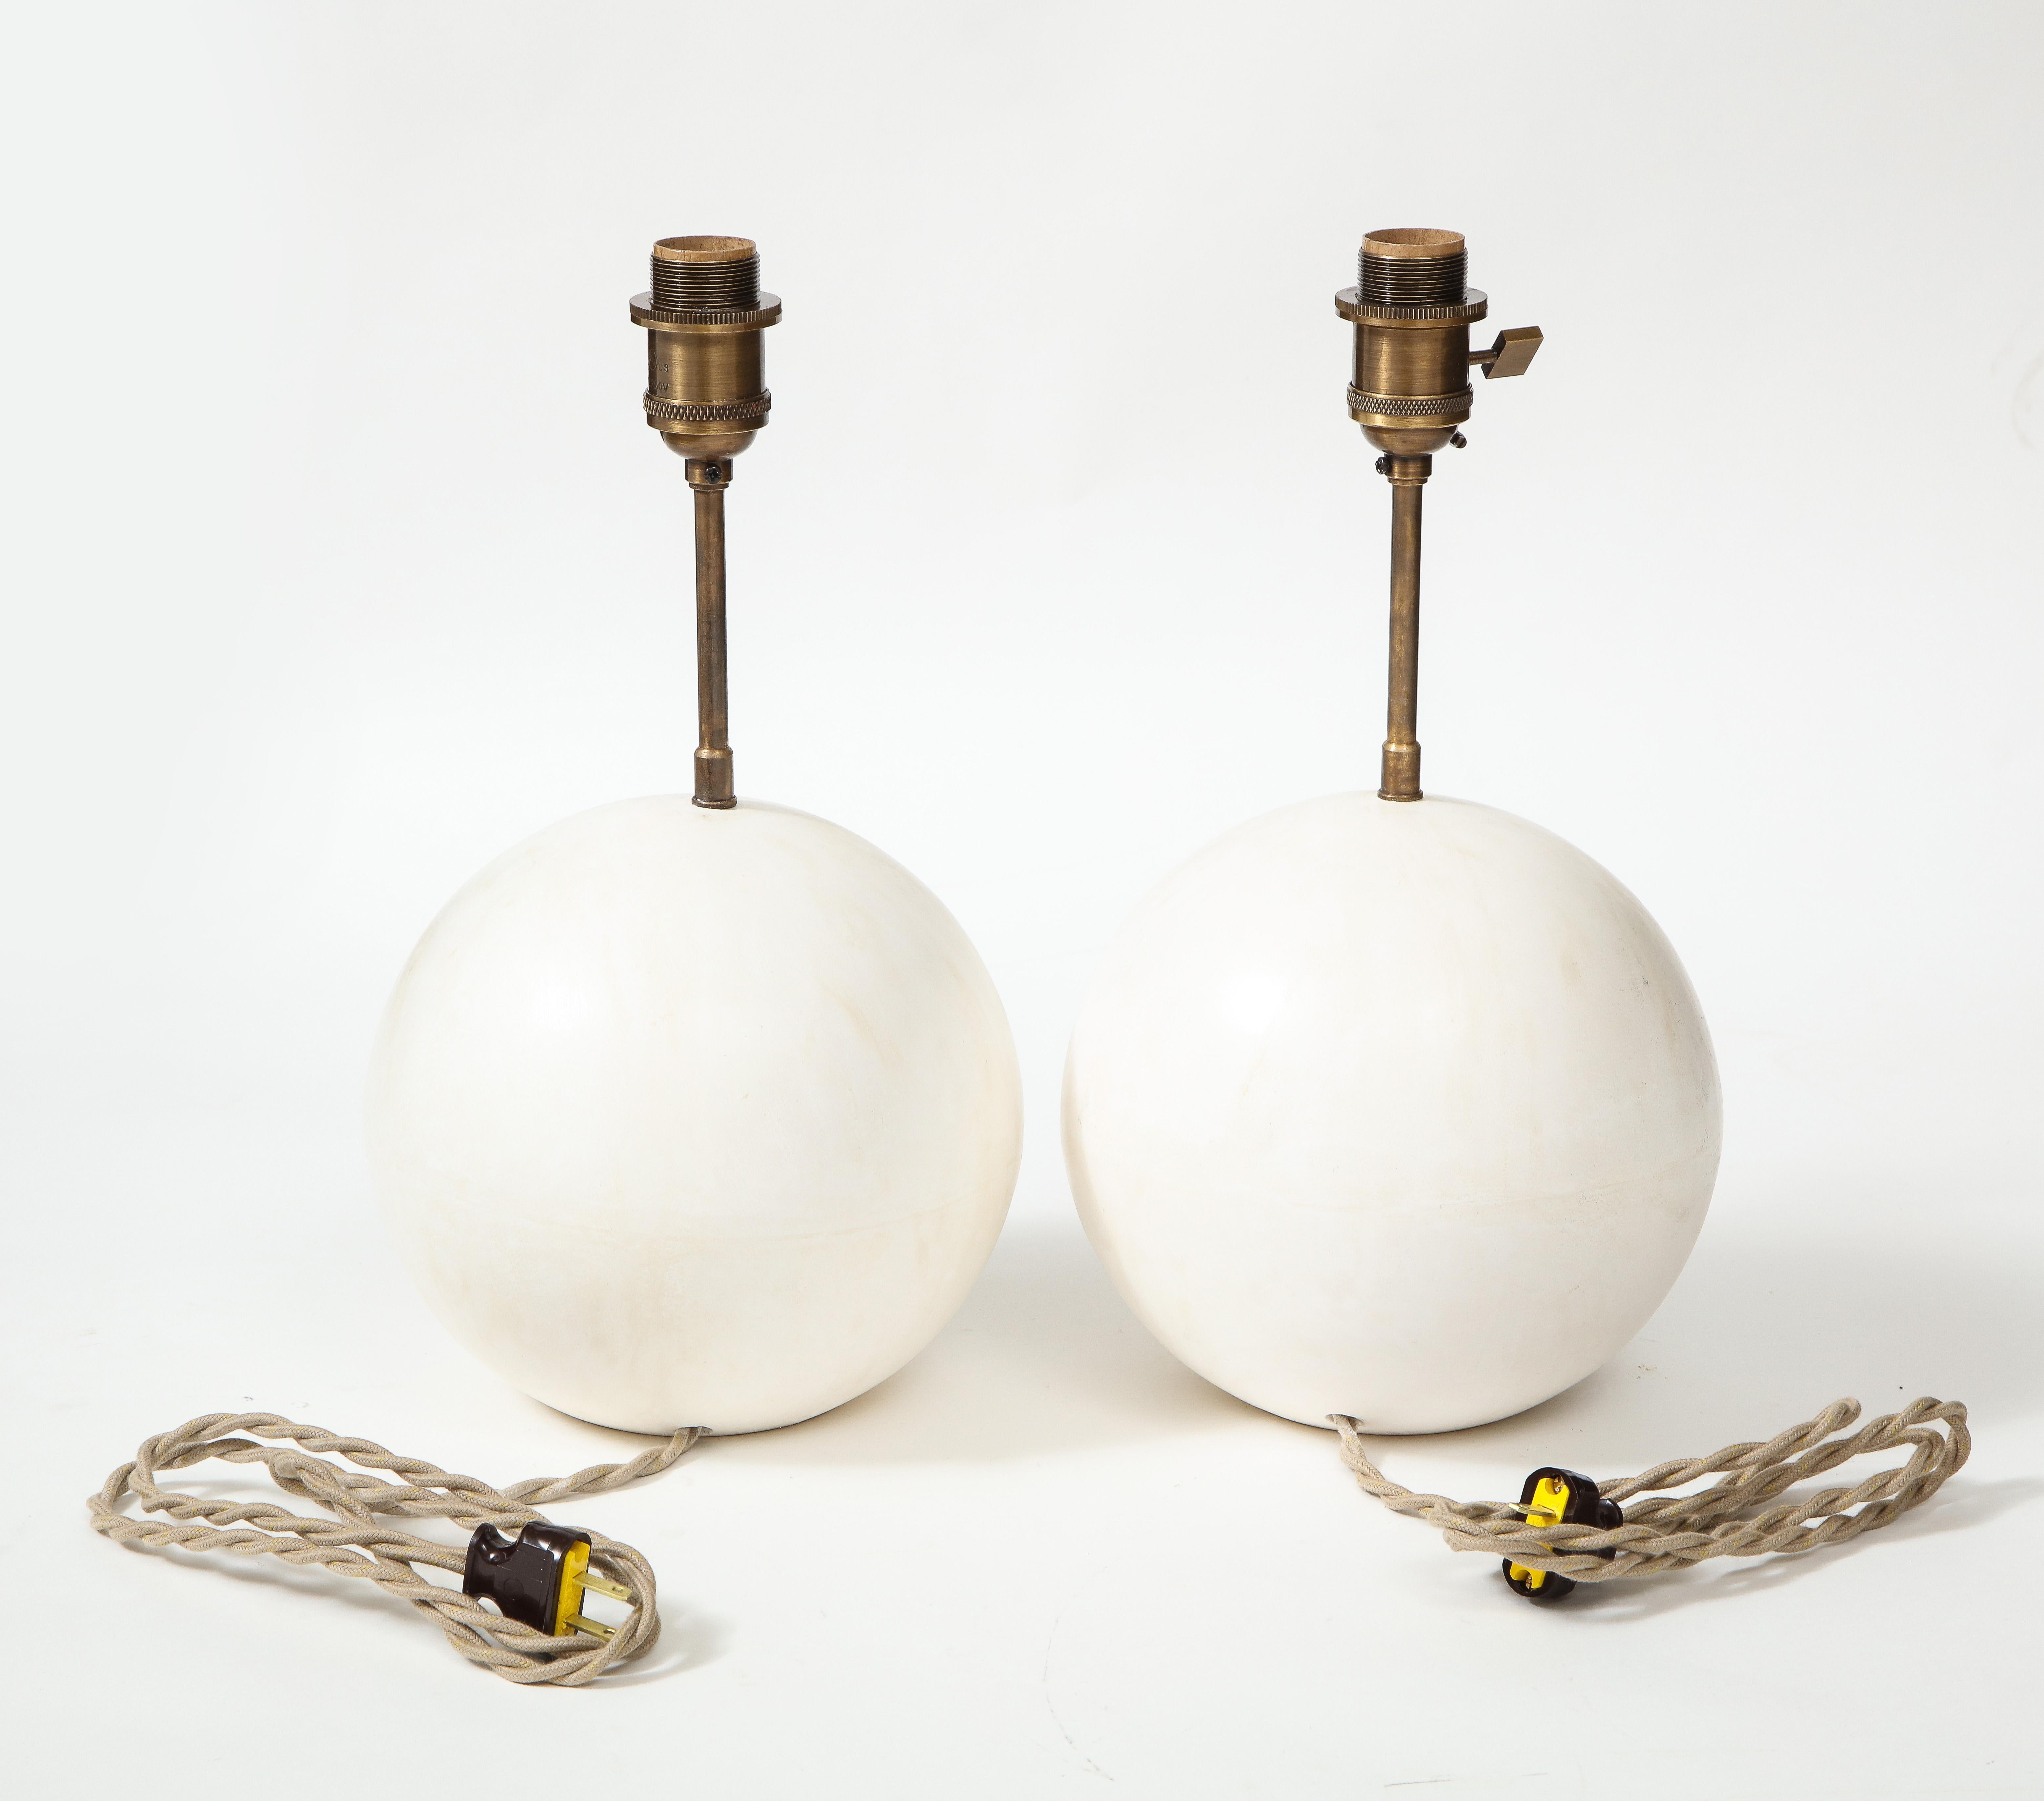 Contemporary Pair of Handmade Plaster Table Lamps with Globe Bases by Facto Atelier Paris